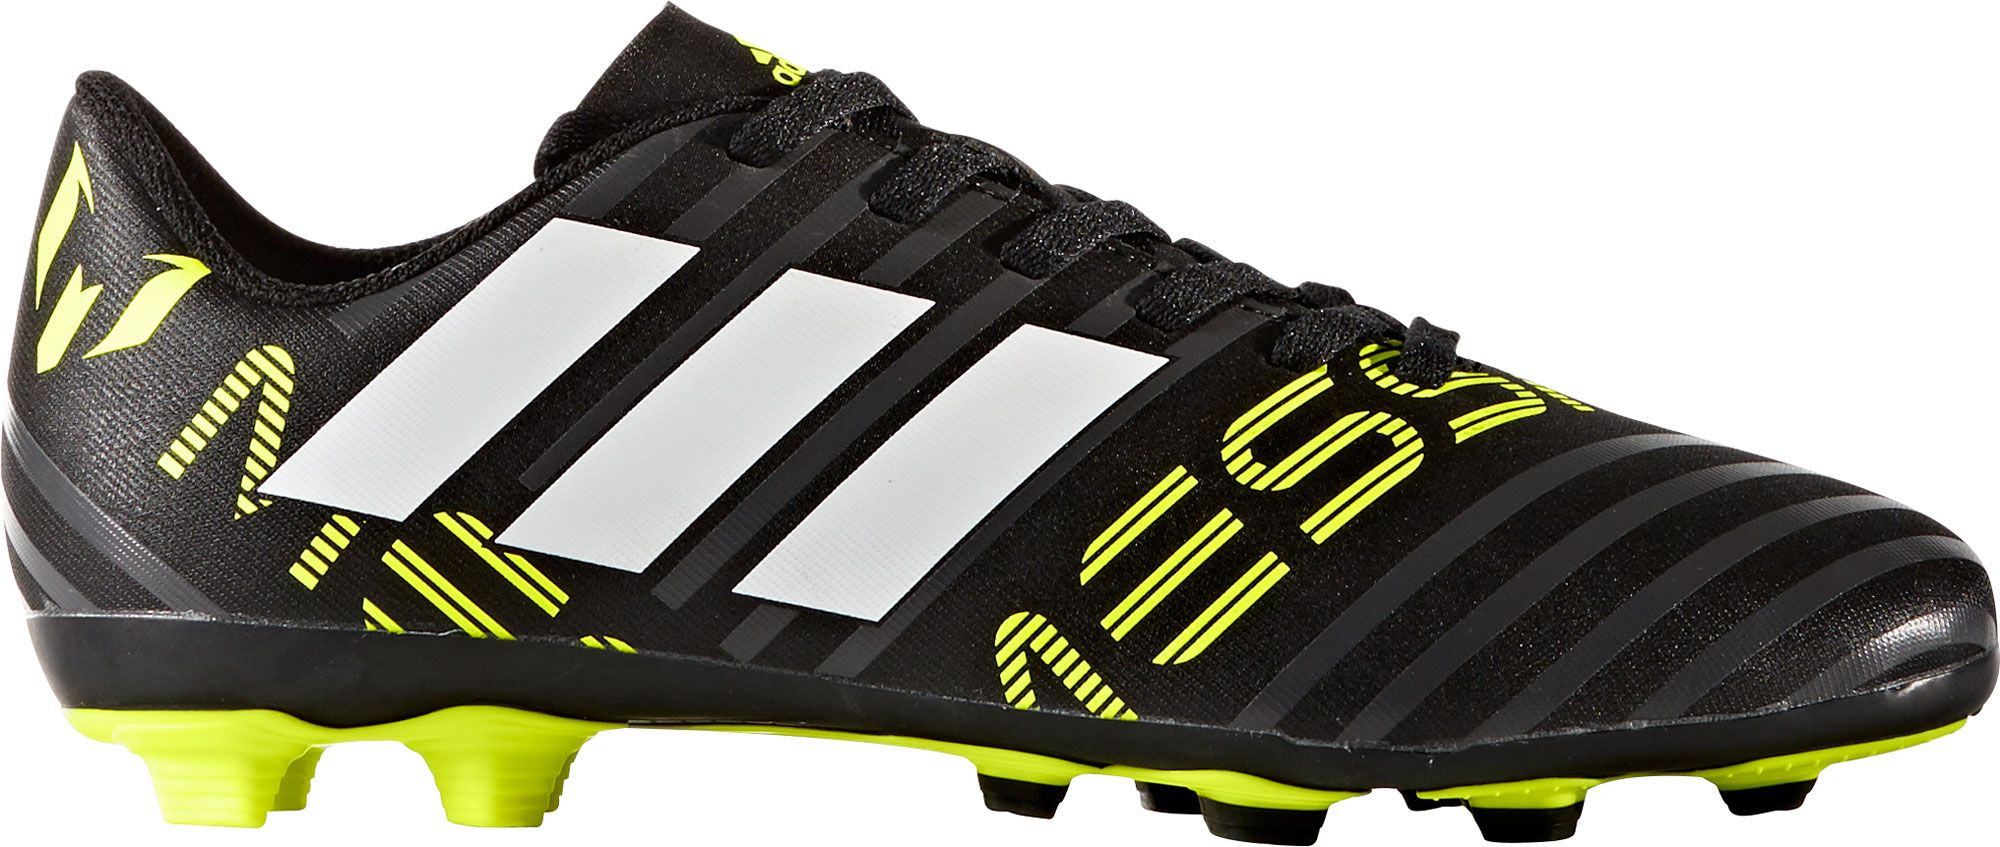 adidas messi soccer cleats